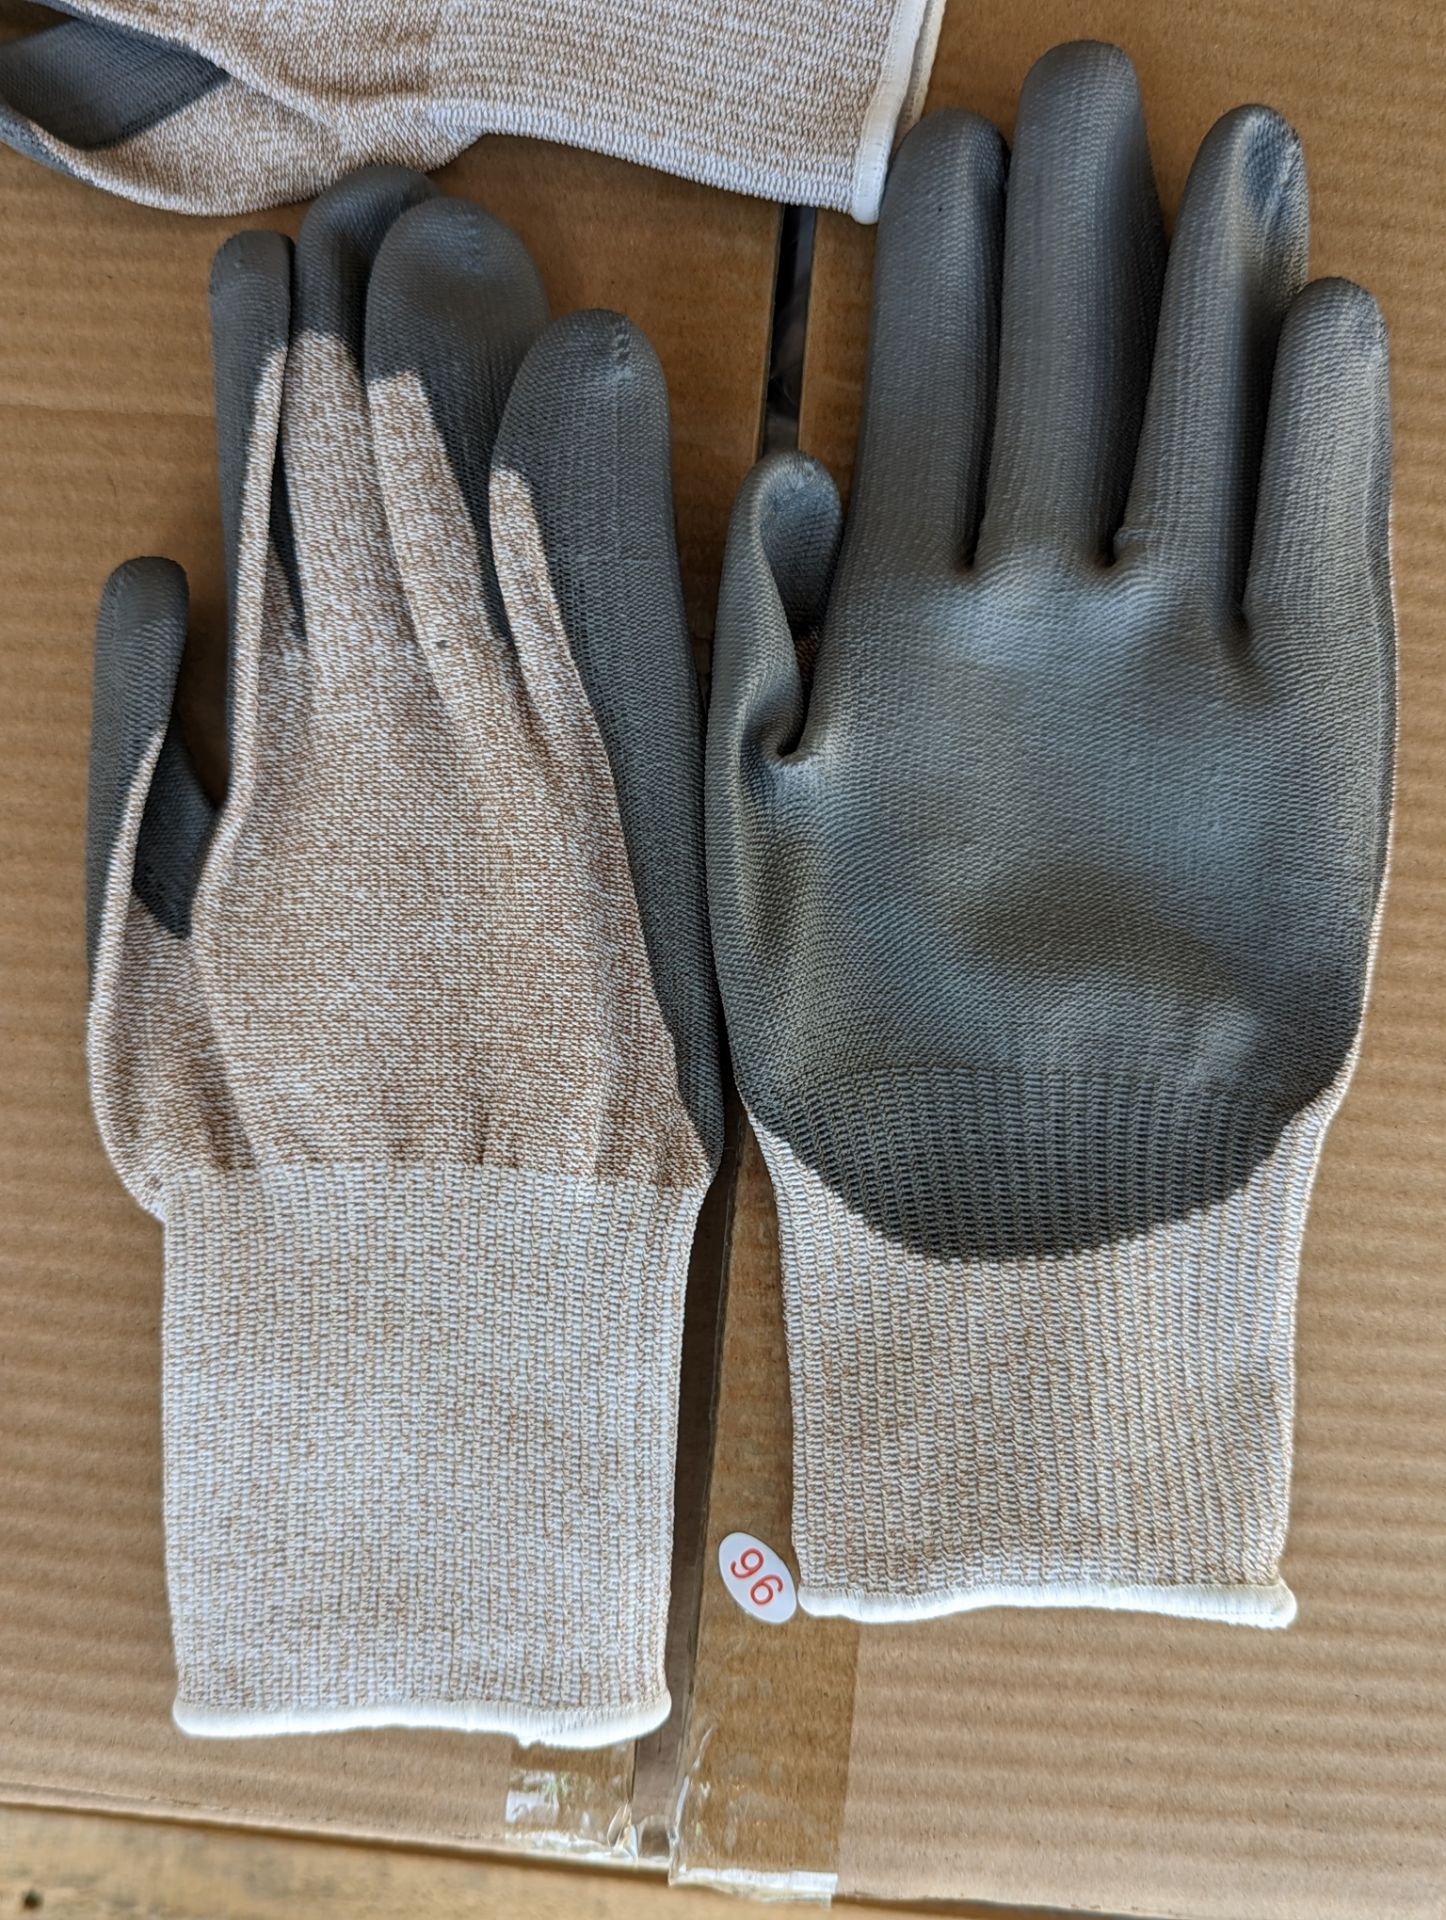 50 Pairs of Cut Resistant Gloves Mixed Sizes - Image 2 of 3